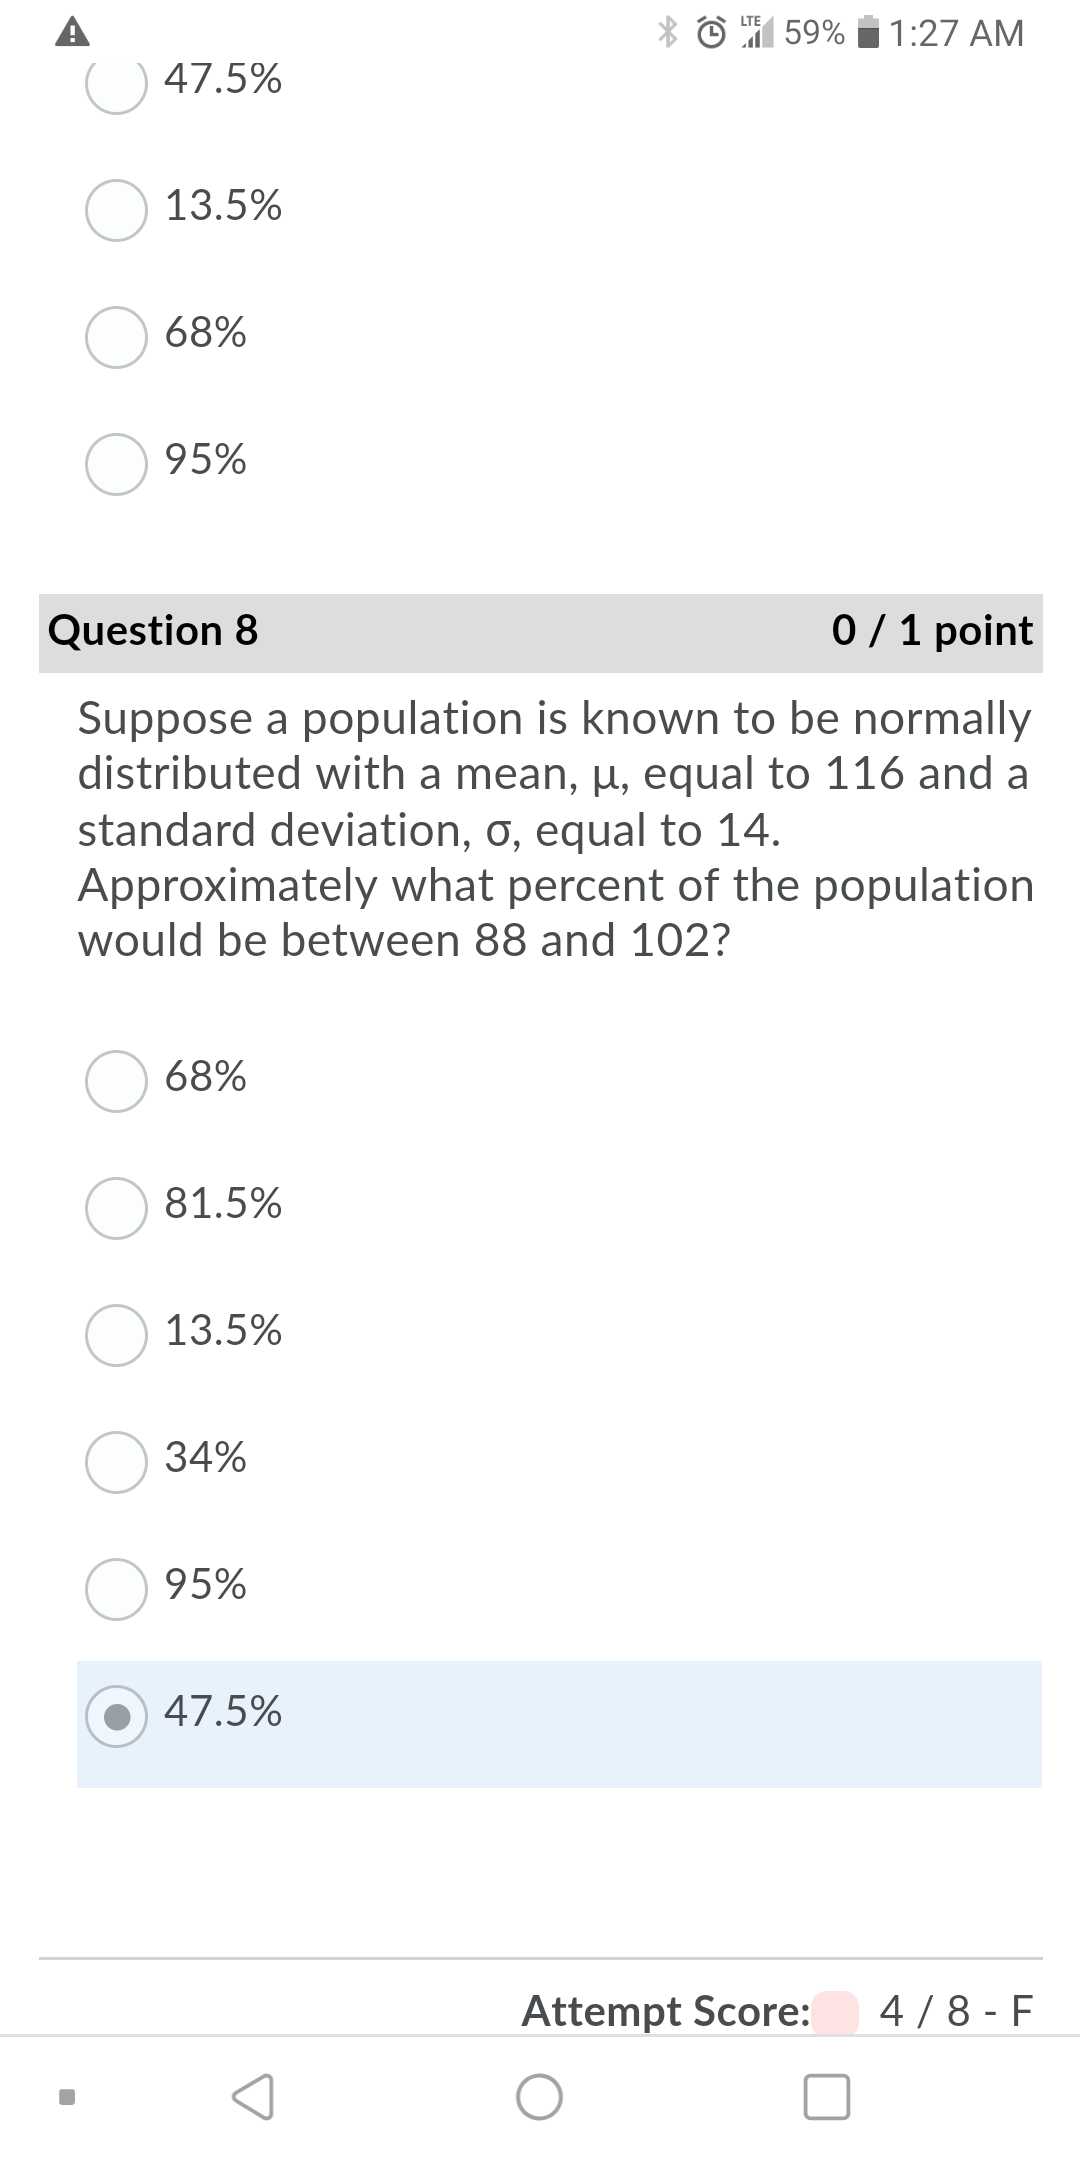 I 59%
1:27 AM
47.5%
13.5%
68%
95%
Question 8
0 / 1 point
Suppose a population is known to be normally
distributed with a mean, u, equal to 116 and a
standard deviation, o, equal to 14.
Approximately what percent of the population
would be between 88 and 102?
68%
81.5%
13.5%
34%
95%
47.5%
Attempt Score:
4 / 8 - F
